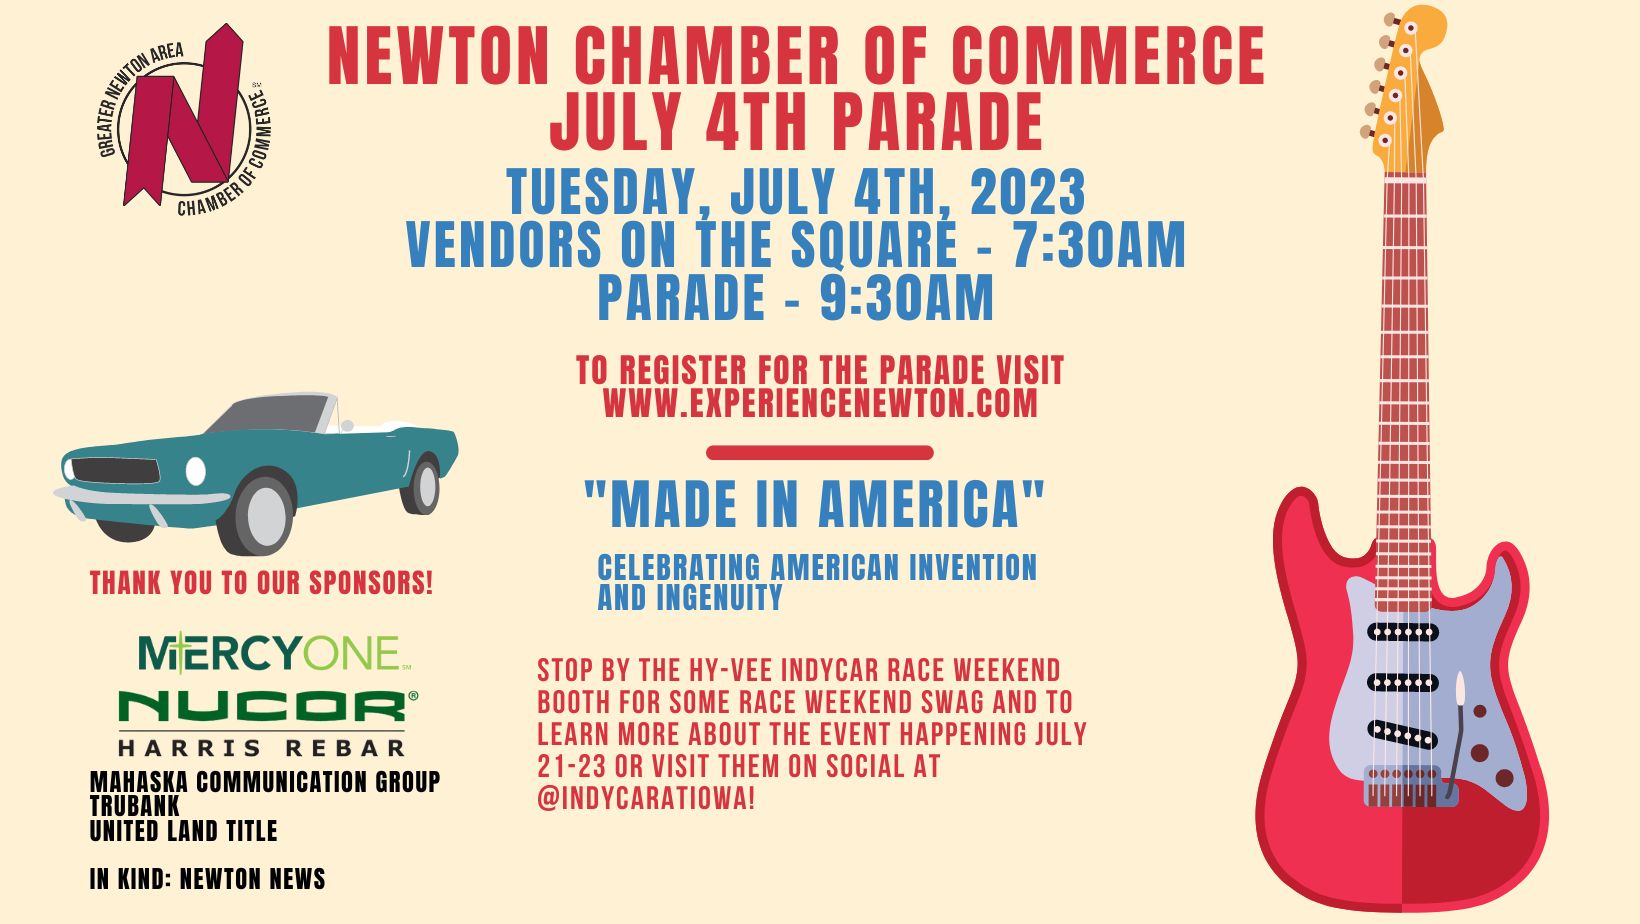 Event Promo Photo For Newton Chamber of Commerce July 4th Parade